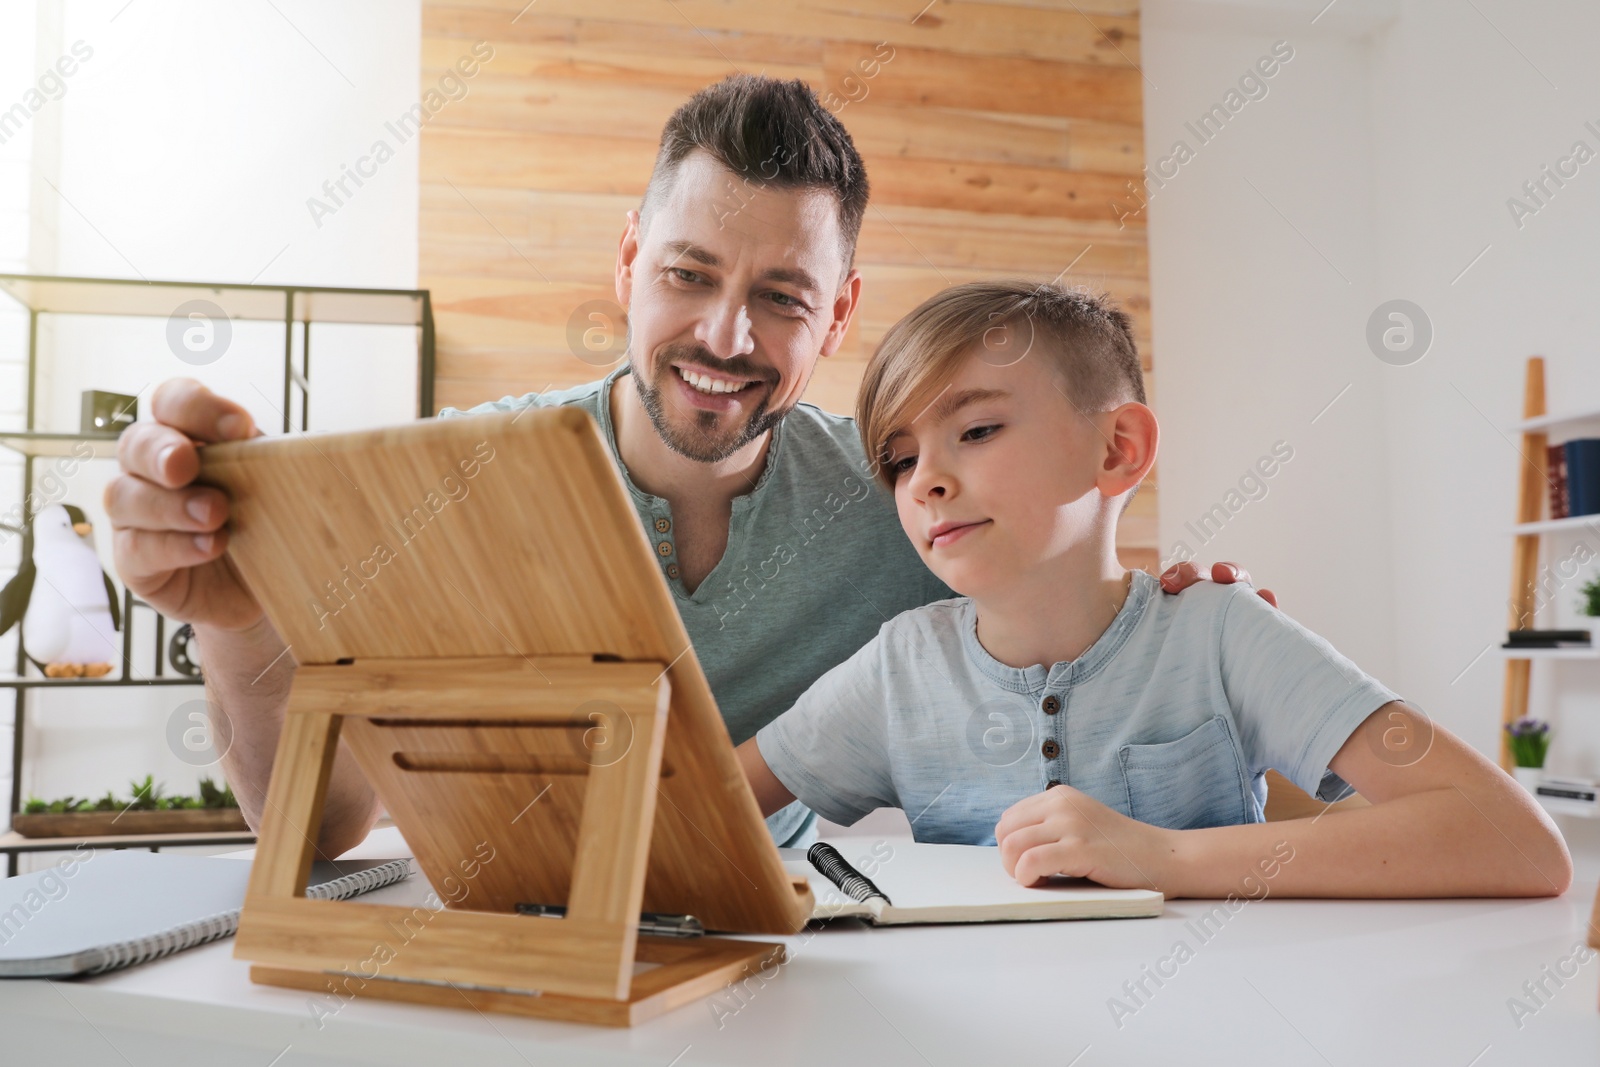 Photo of Boy with father doing homework using tablet at table indoors